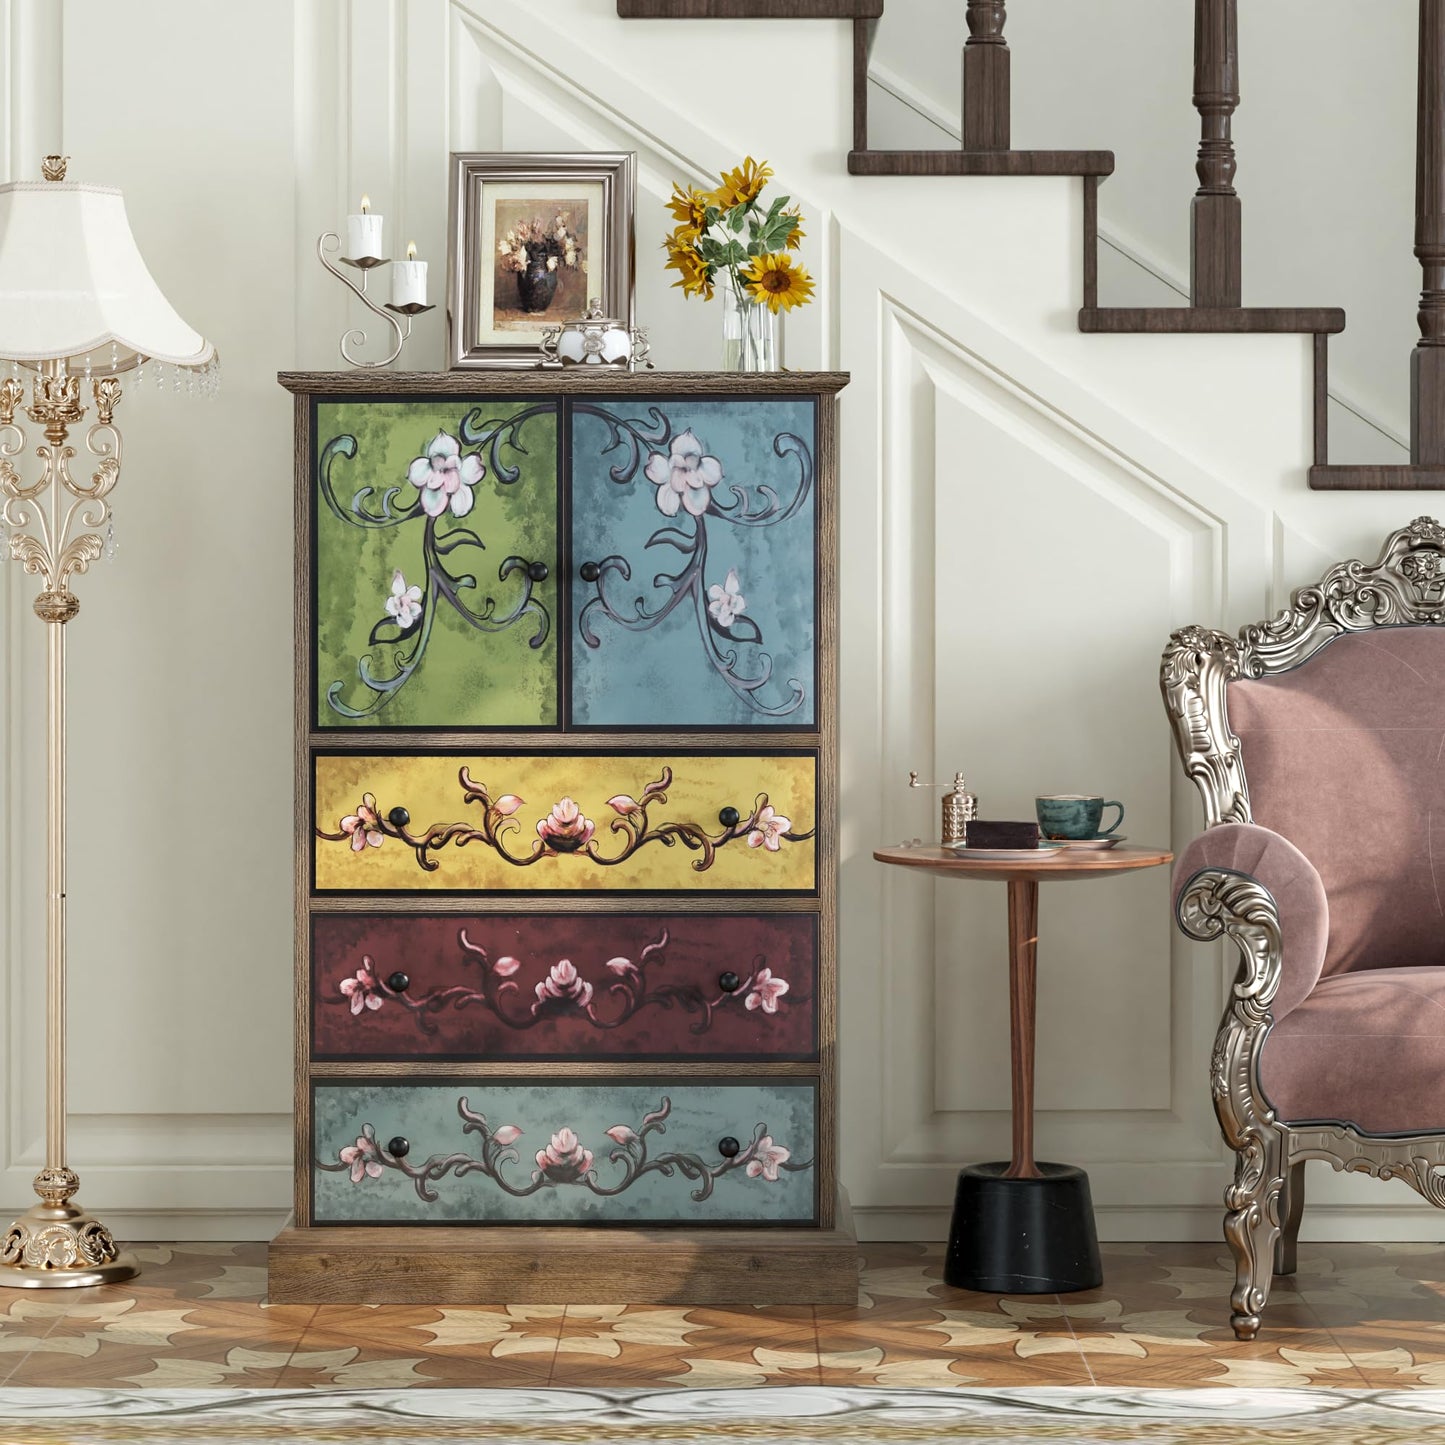 finetones Wood Dresser Chest of Drawers, Tall Dresser Boho Dresser with Drawers and Doors, 16.1D x 23.6W 42.3H Inch Wood Dresser Accent Dresser for Home Office